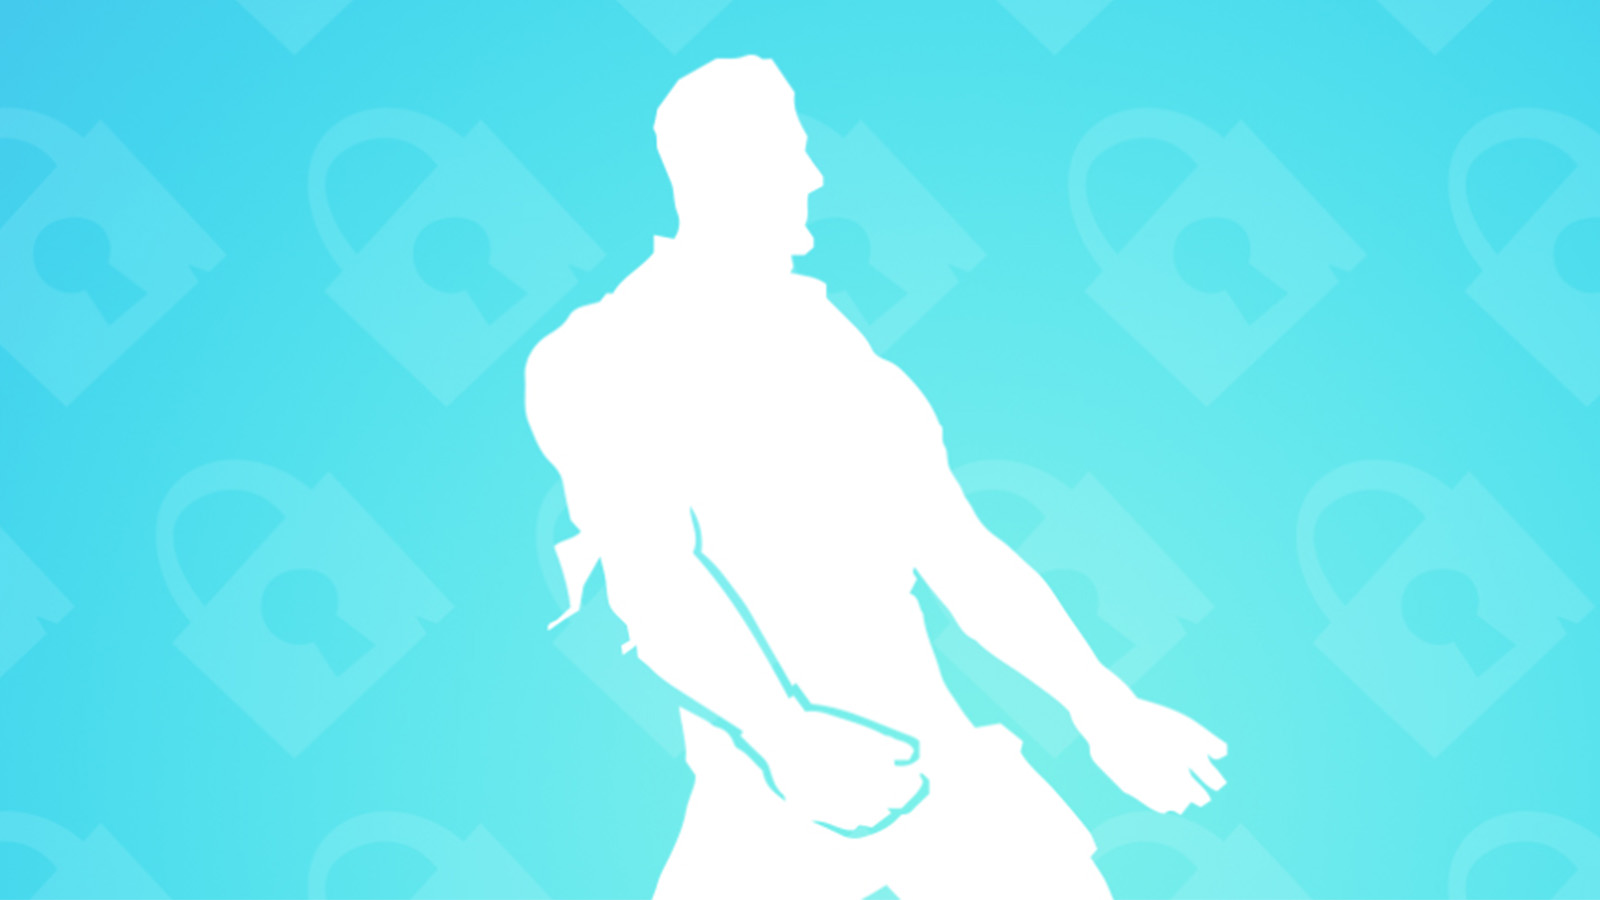 How to enable and use Fortnite's 2FA (two-factor authentication